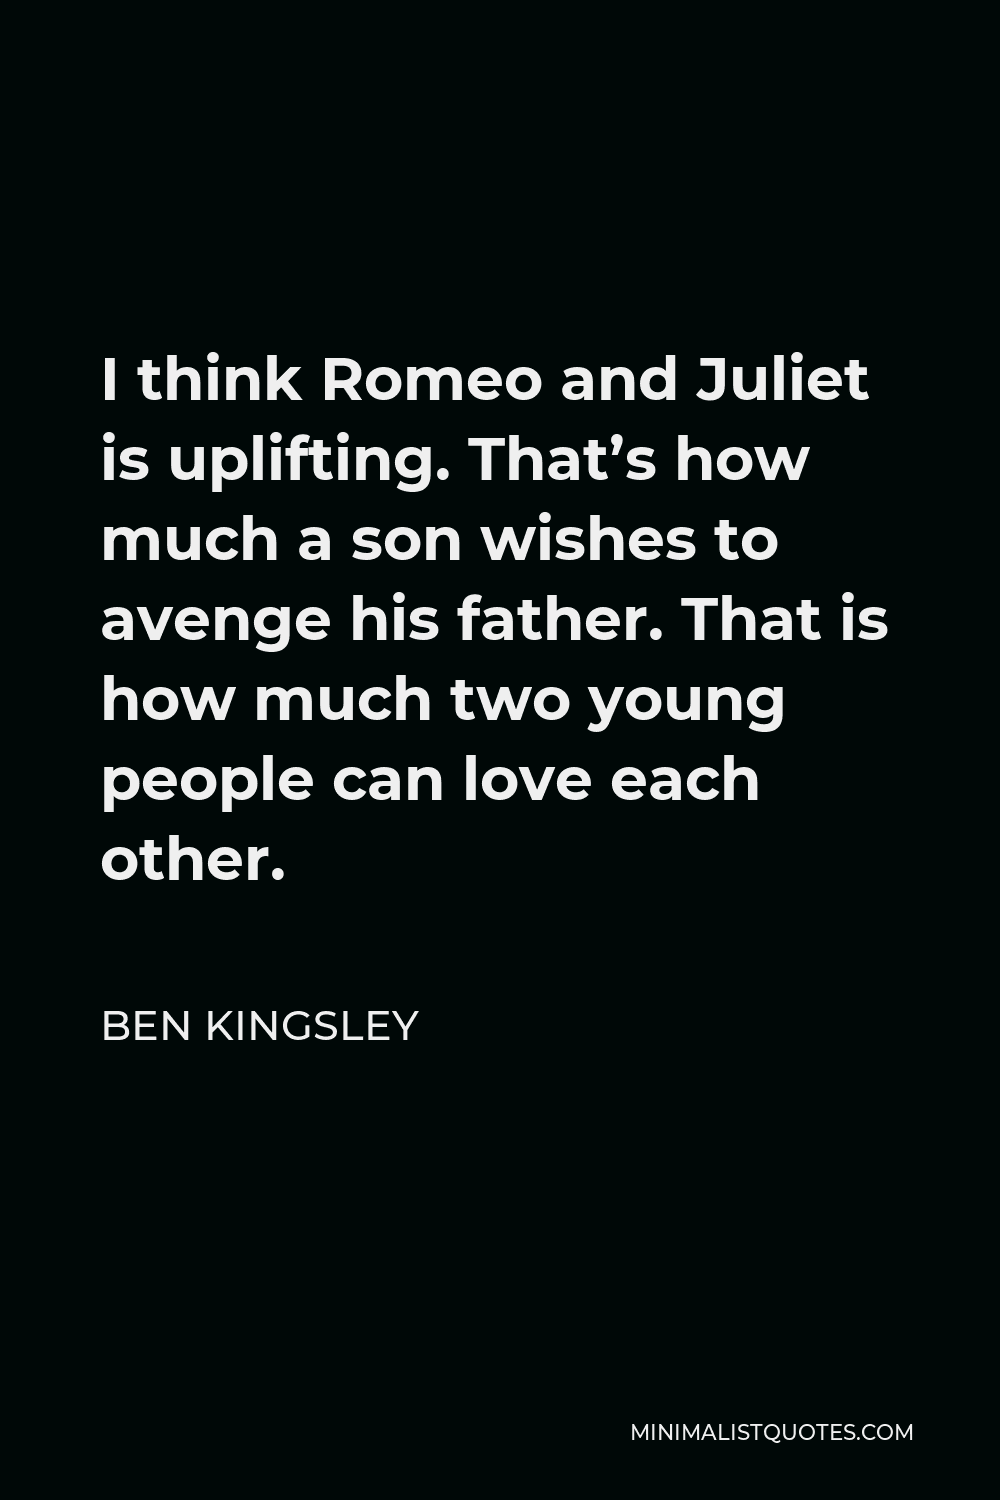 Ben Kingsley Quote - I think Romeo and Juliet is uplifting. That’s how much a son wishes to avenge his father. That is how much two young people can love each other.